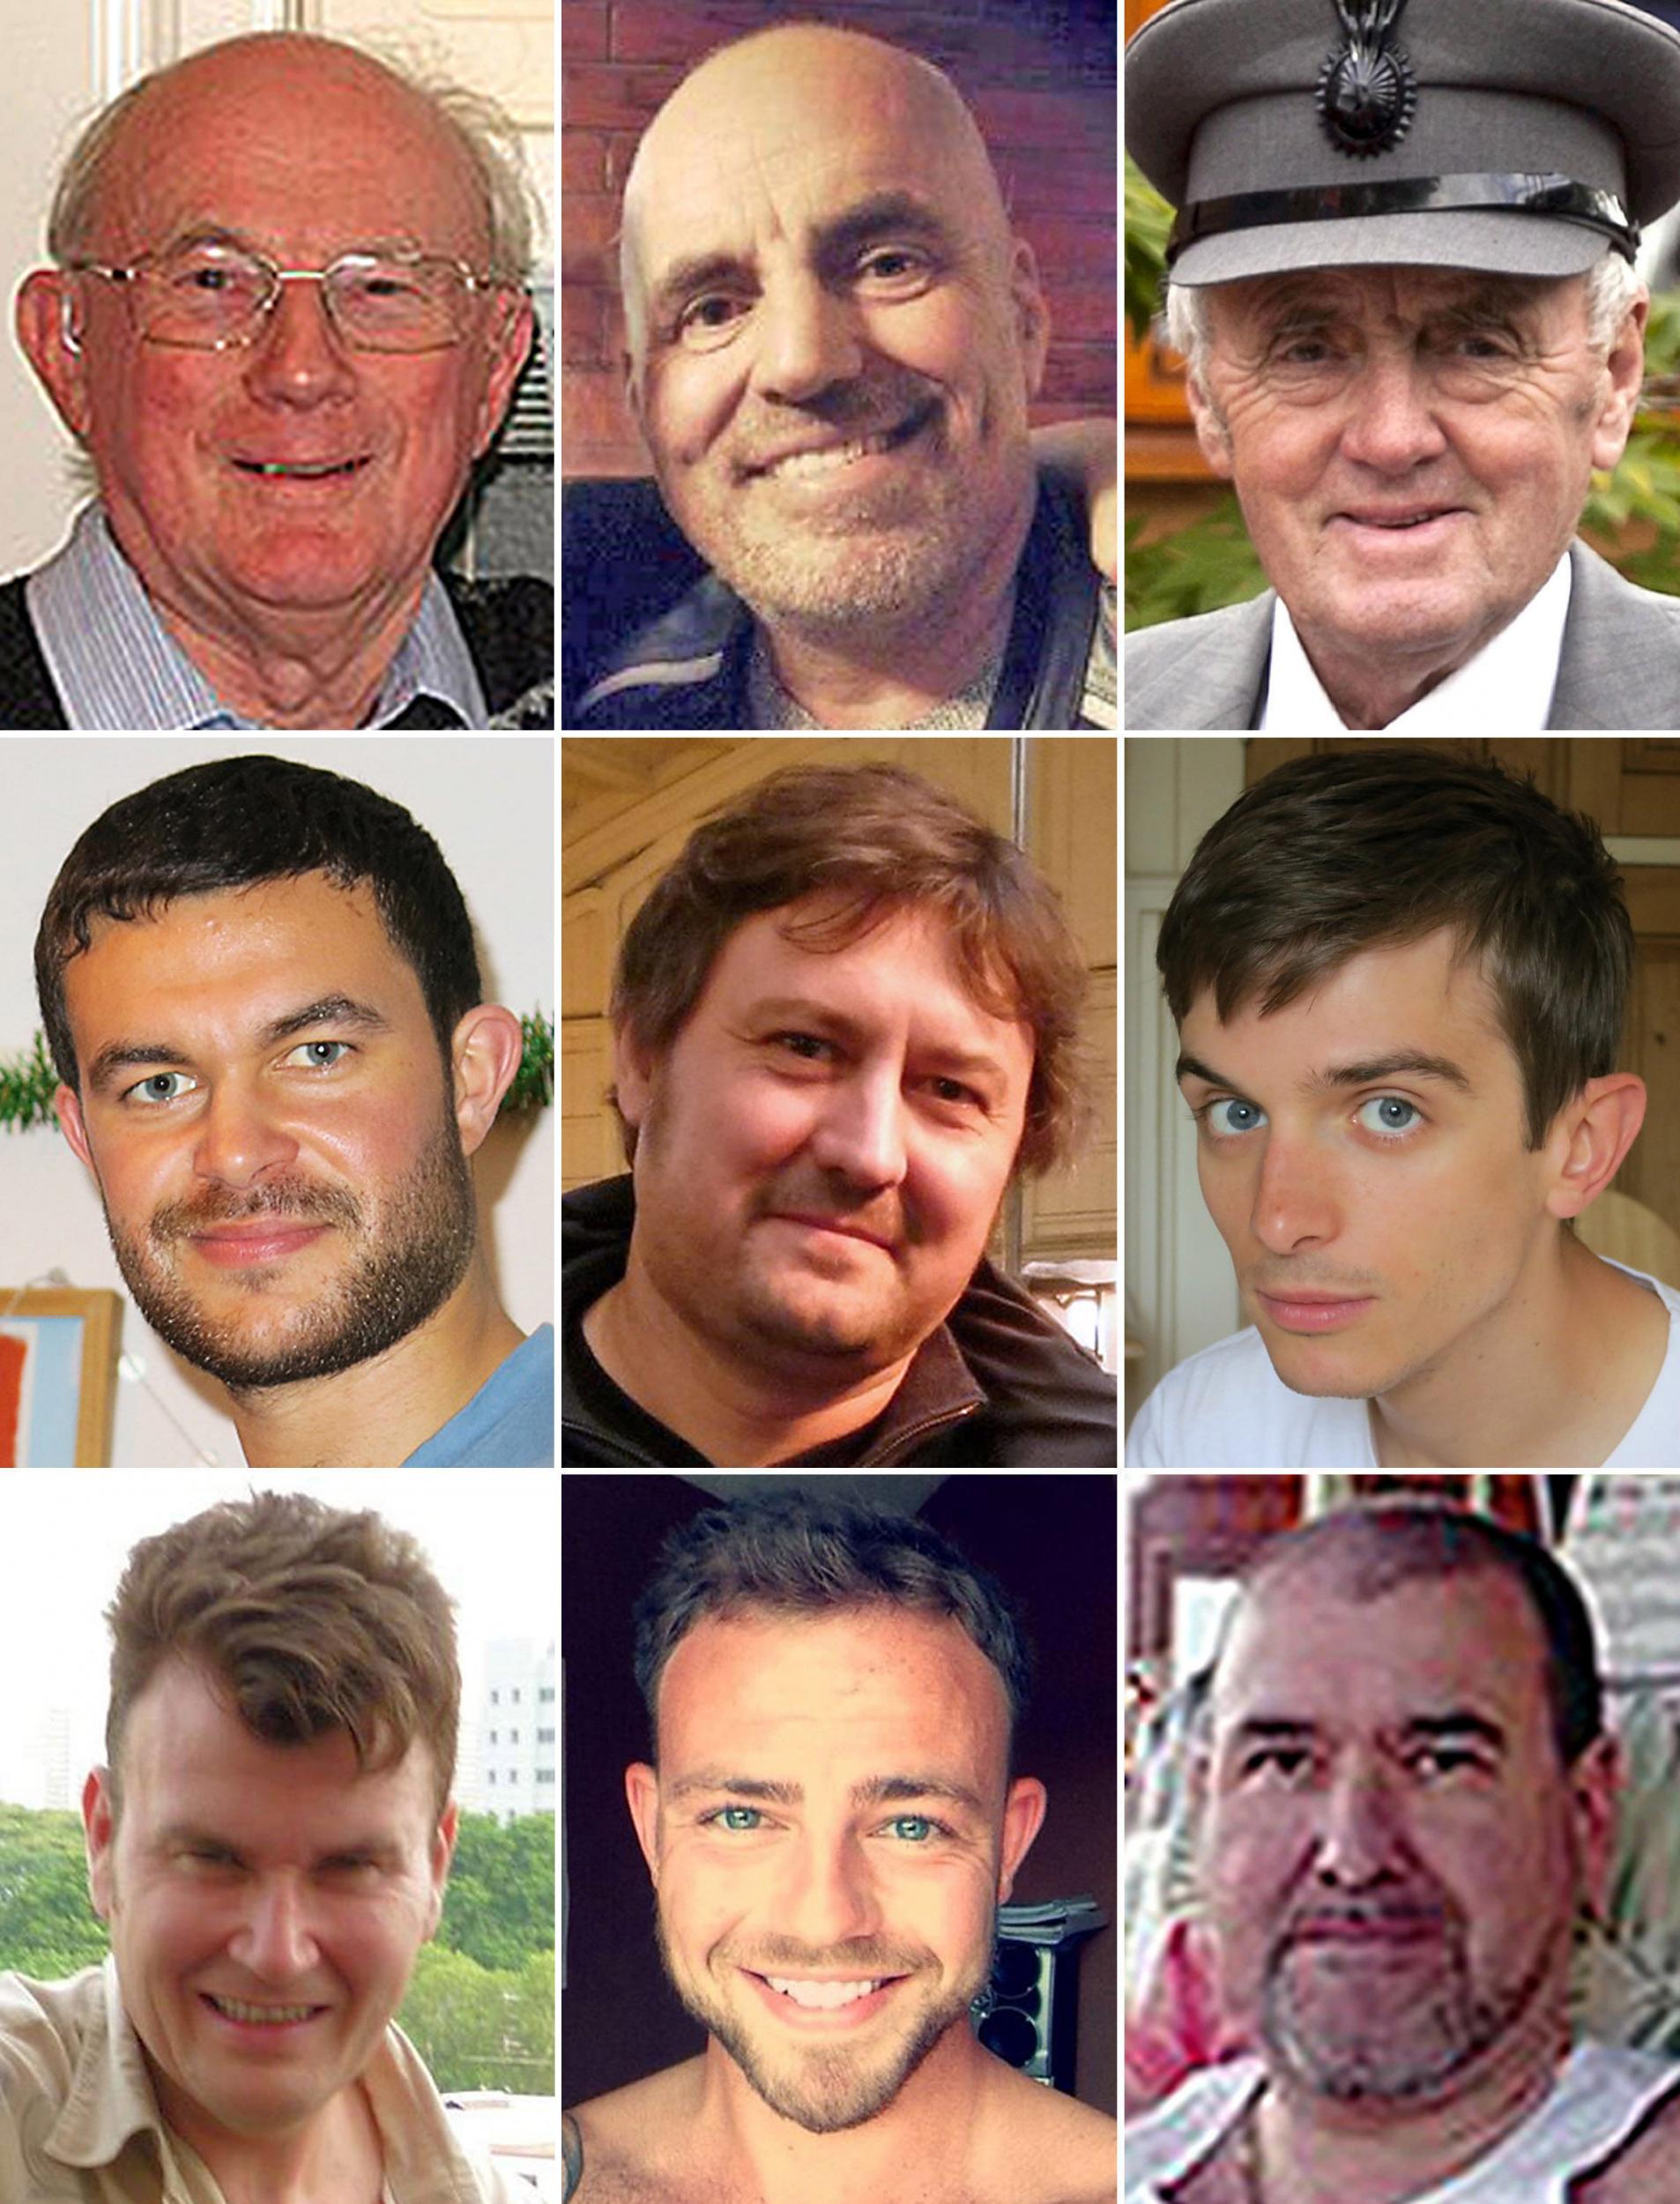 Those who died in the Shoreham air show crash included: (top row, L to R) Graham Mallinson, Mark Trussler and Maurice Abrahams, (middle row, L to R) Matthew Grimstone, Dylan Archer and Richard Smith, (bottom row, L to R) Tony Brightwell, Matt Jones and Mark Reeves.